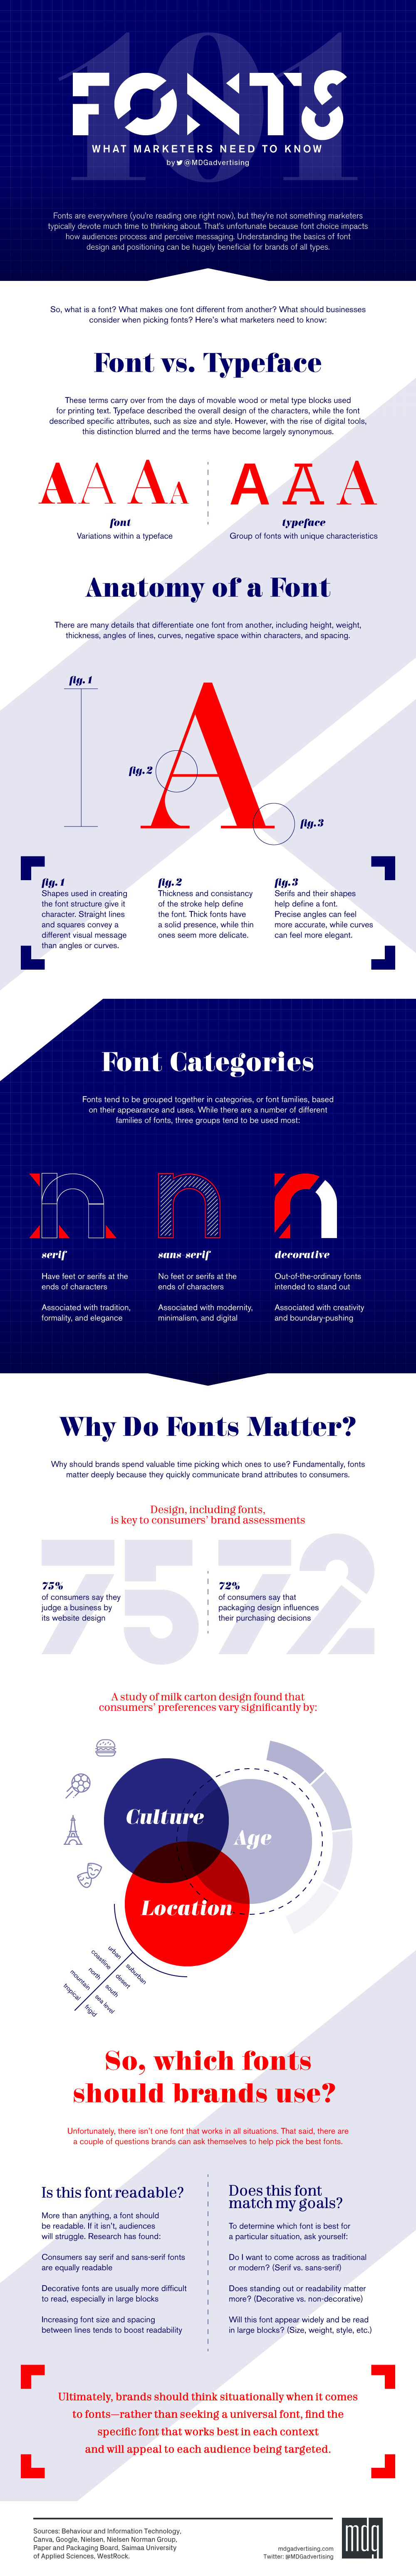 Fonts 101: What Marketers Need to Know [Infographic]